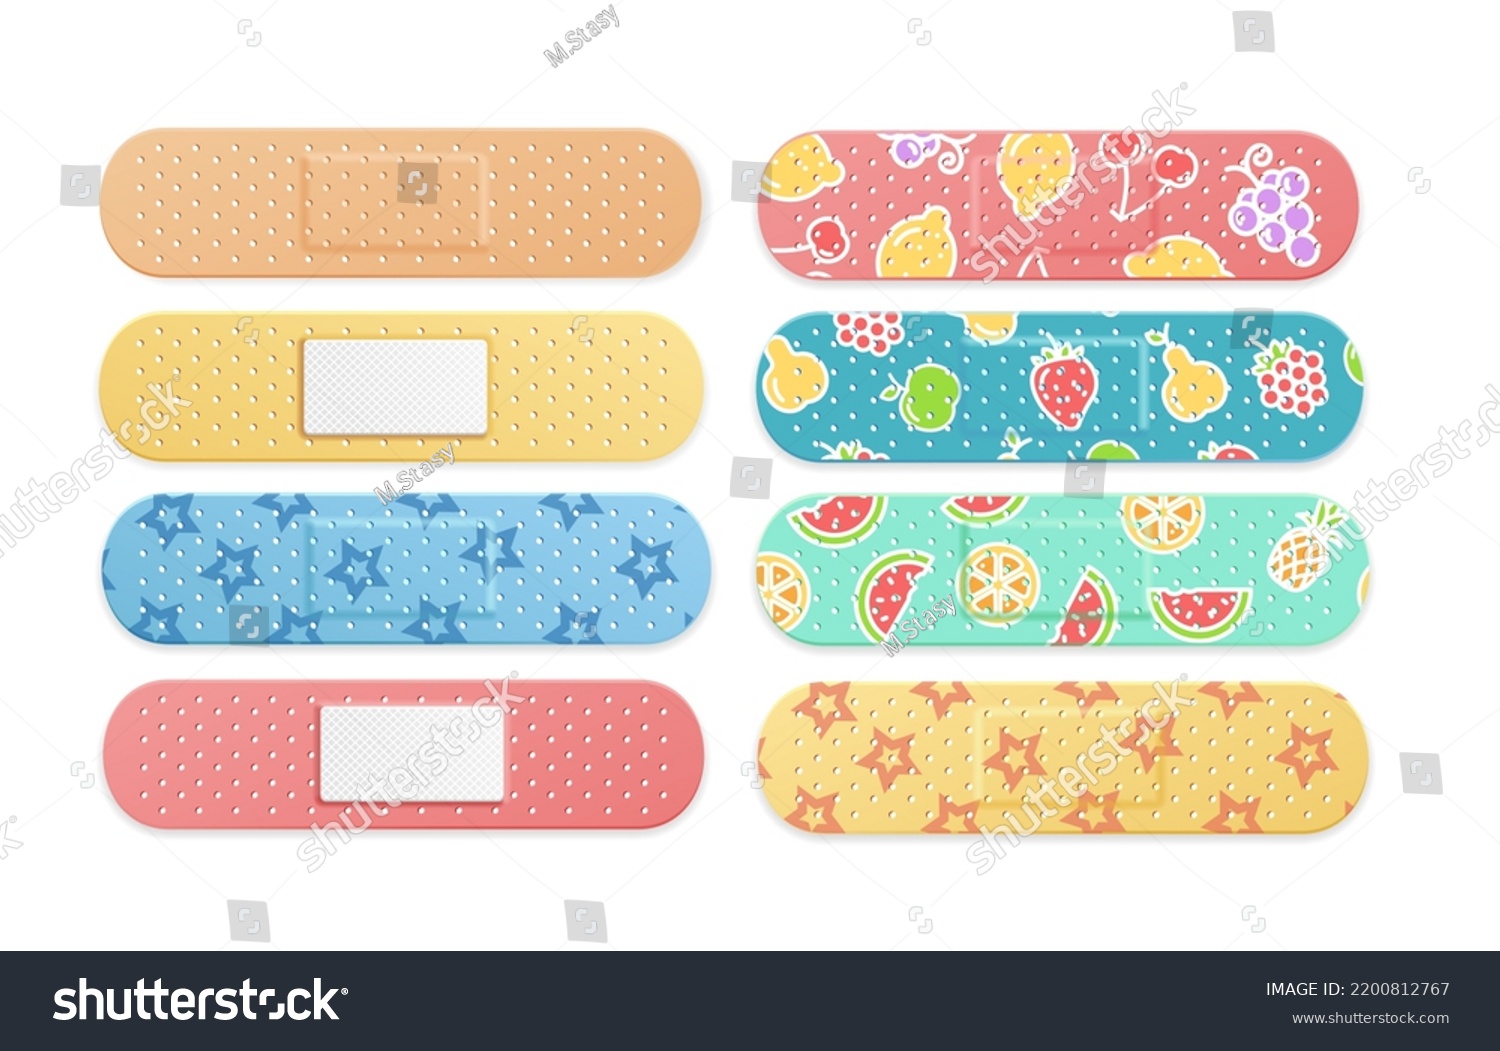 Realistic Detailed 3d Different Kid Aid Band Plaster Medical Patch Color Set. Vector illustration of Adhesive Bandage #2200812767